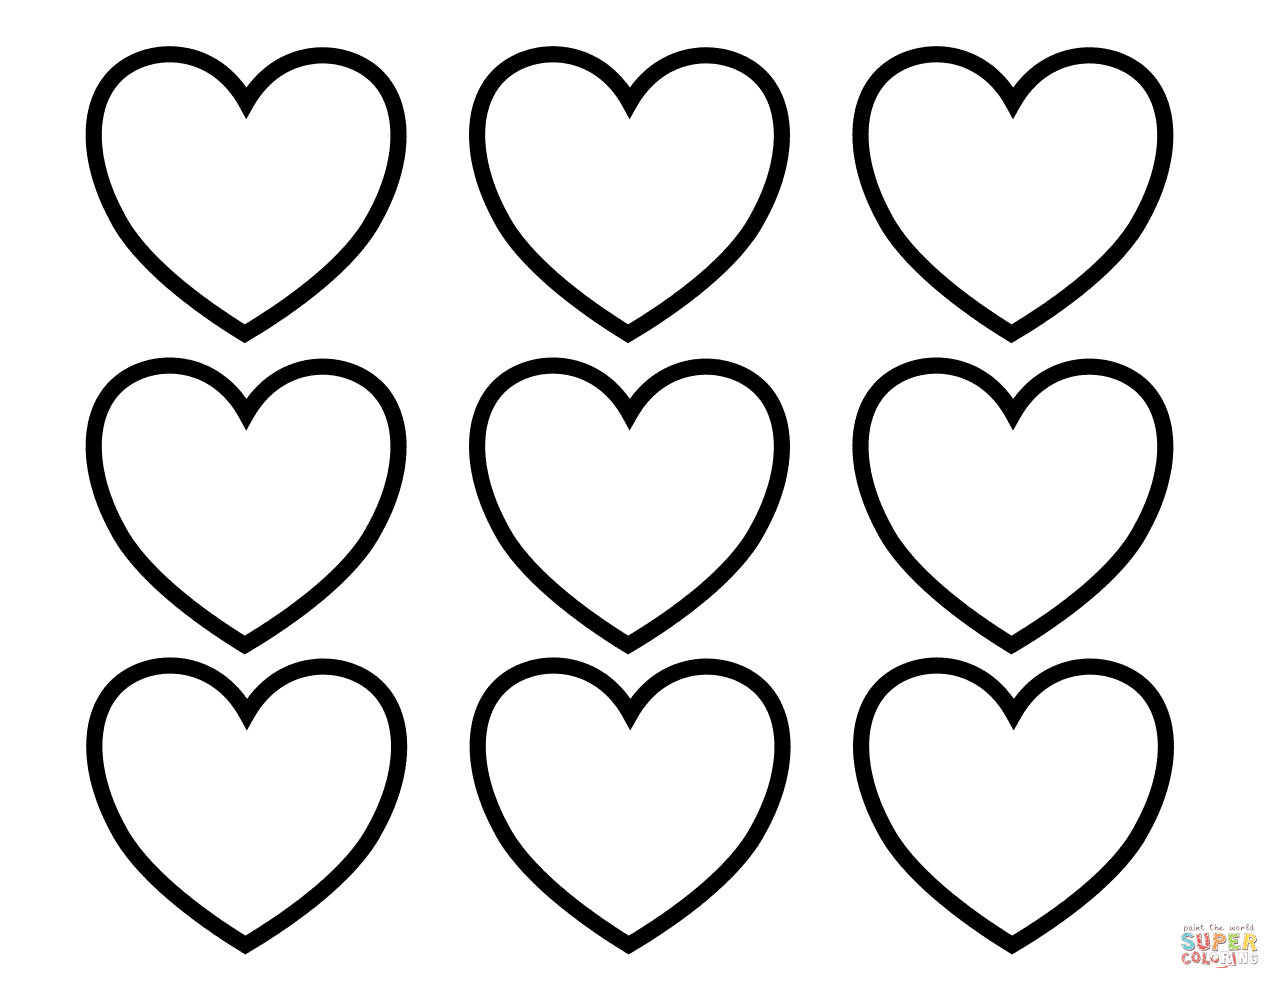 Valentines Day Hearts Coloring Pages Valentines Day Blank Hearts Coloring Page Free Printable Coloring